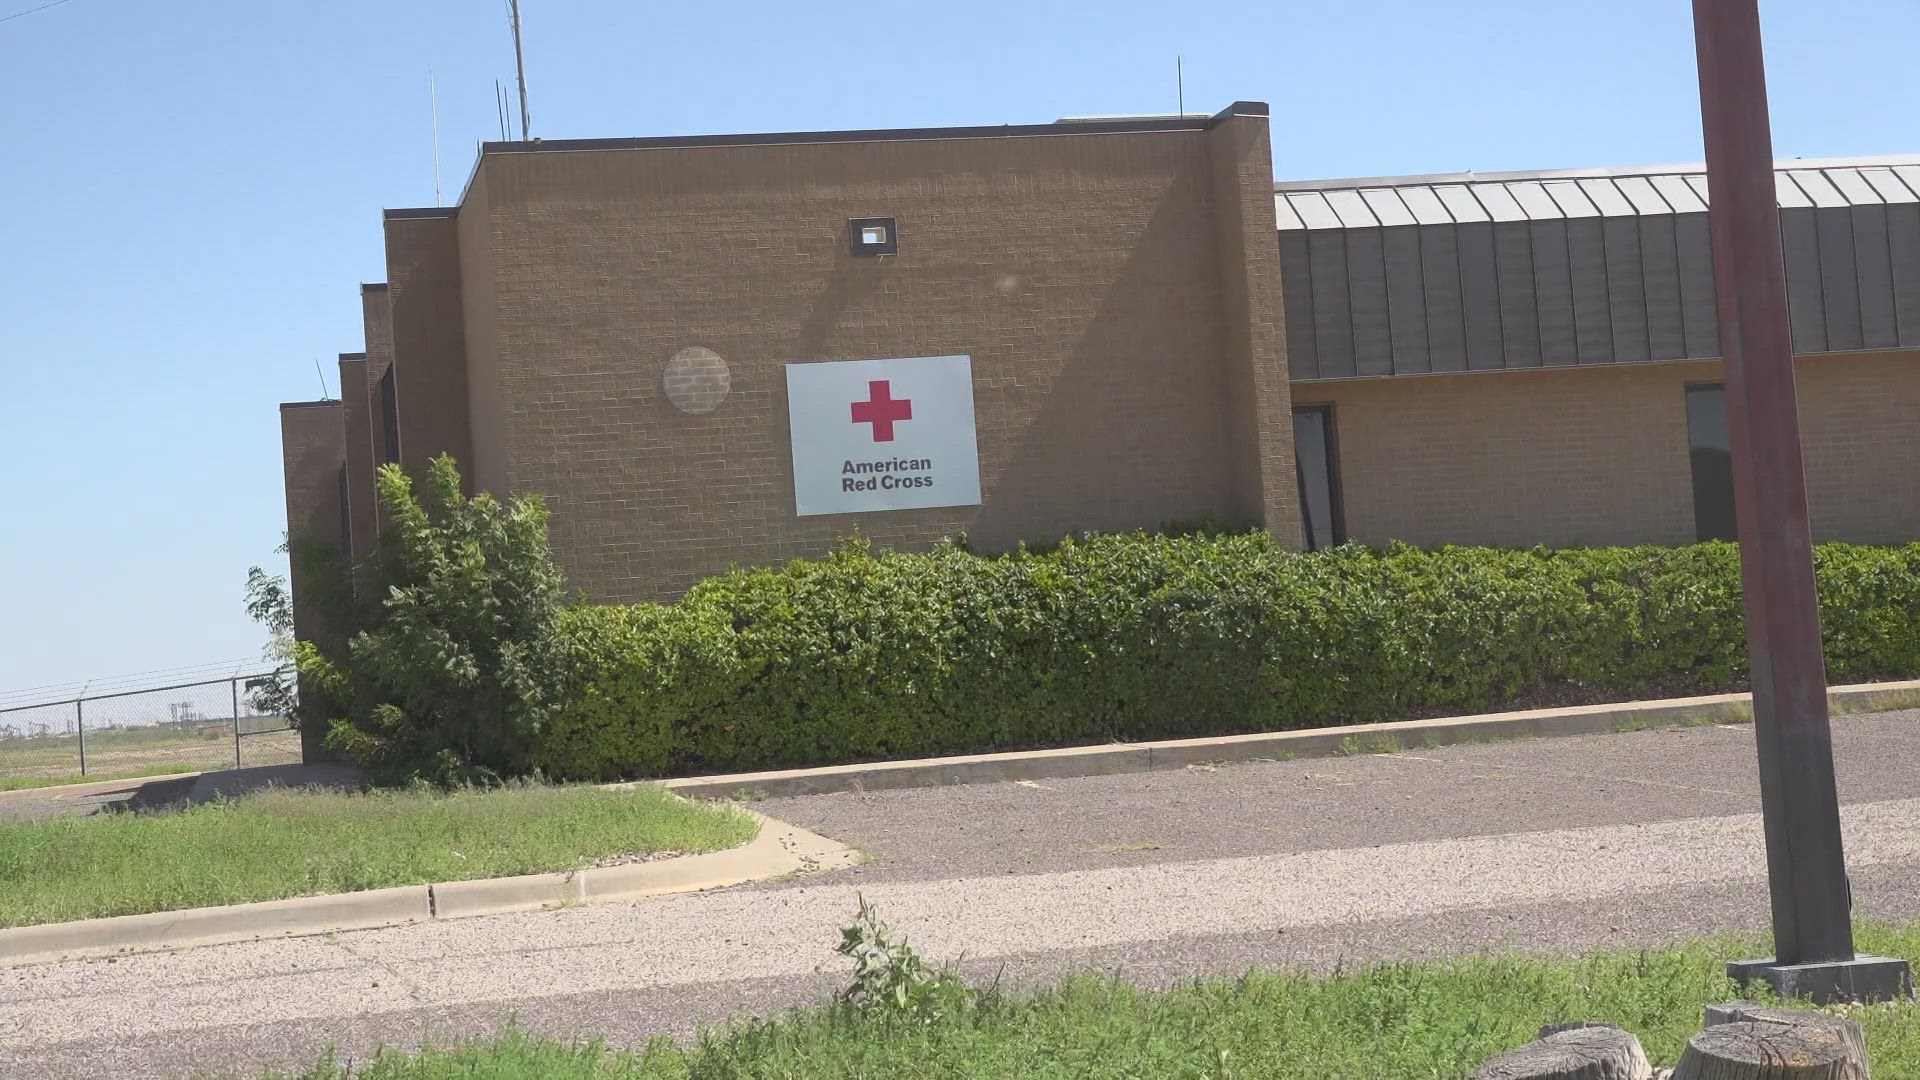 NewsWest 9 spoke with the Permian Basin Red Cross on how they deploy volunteers to weather impact areas.